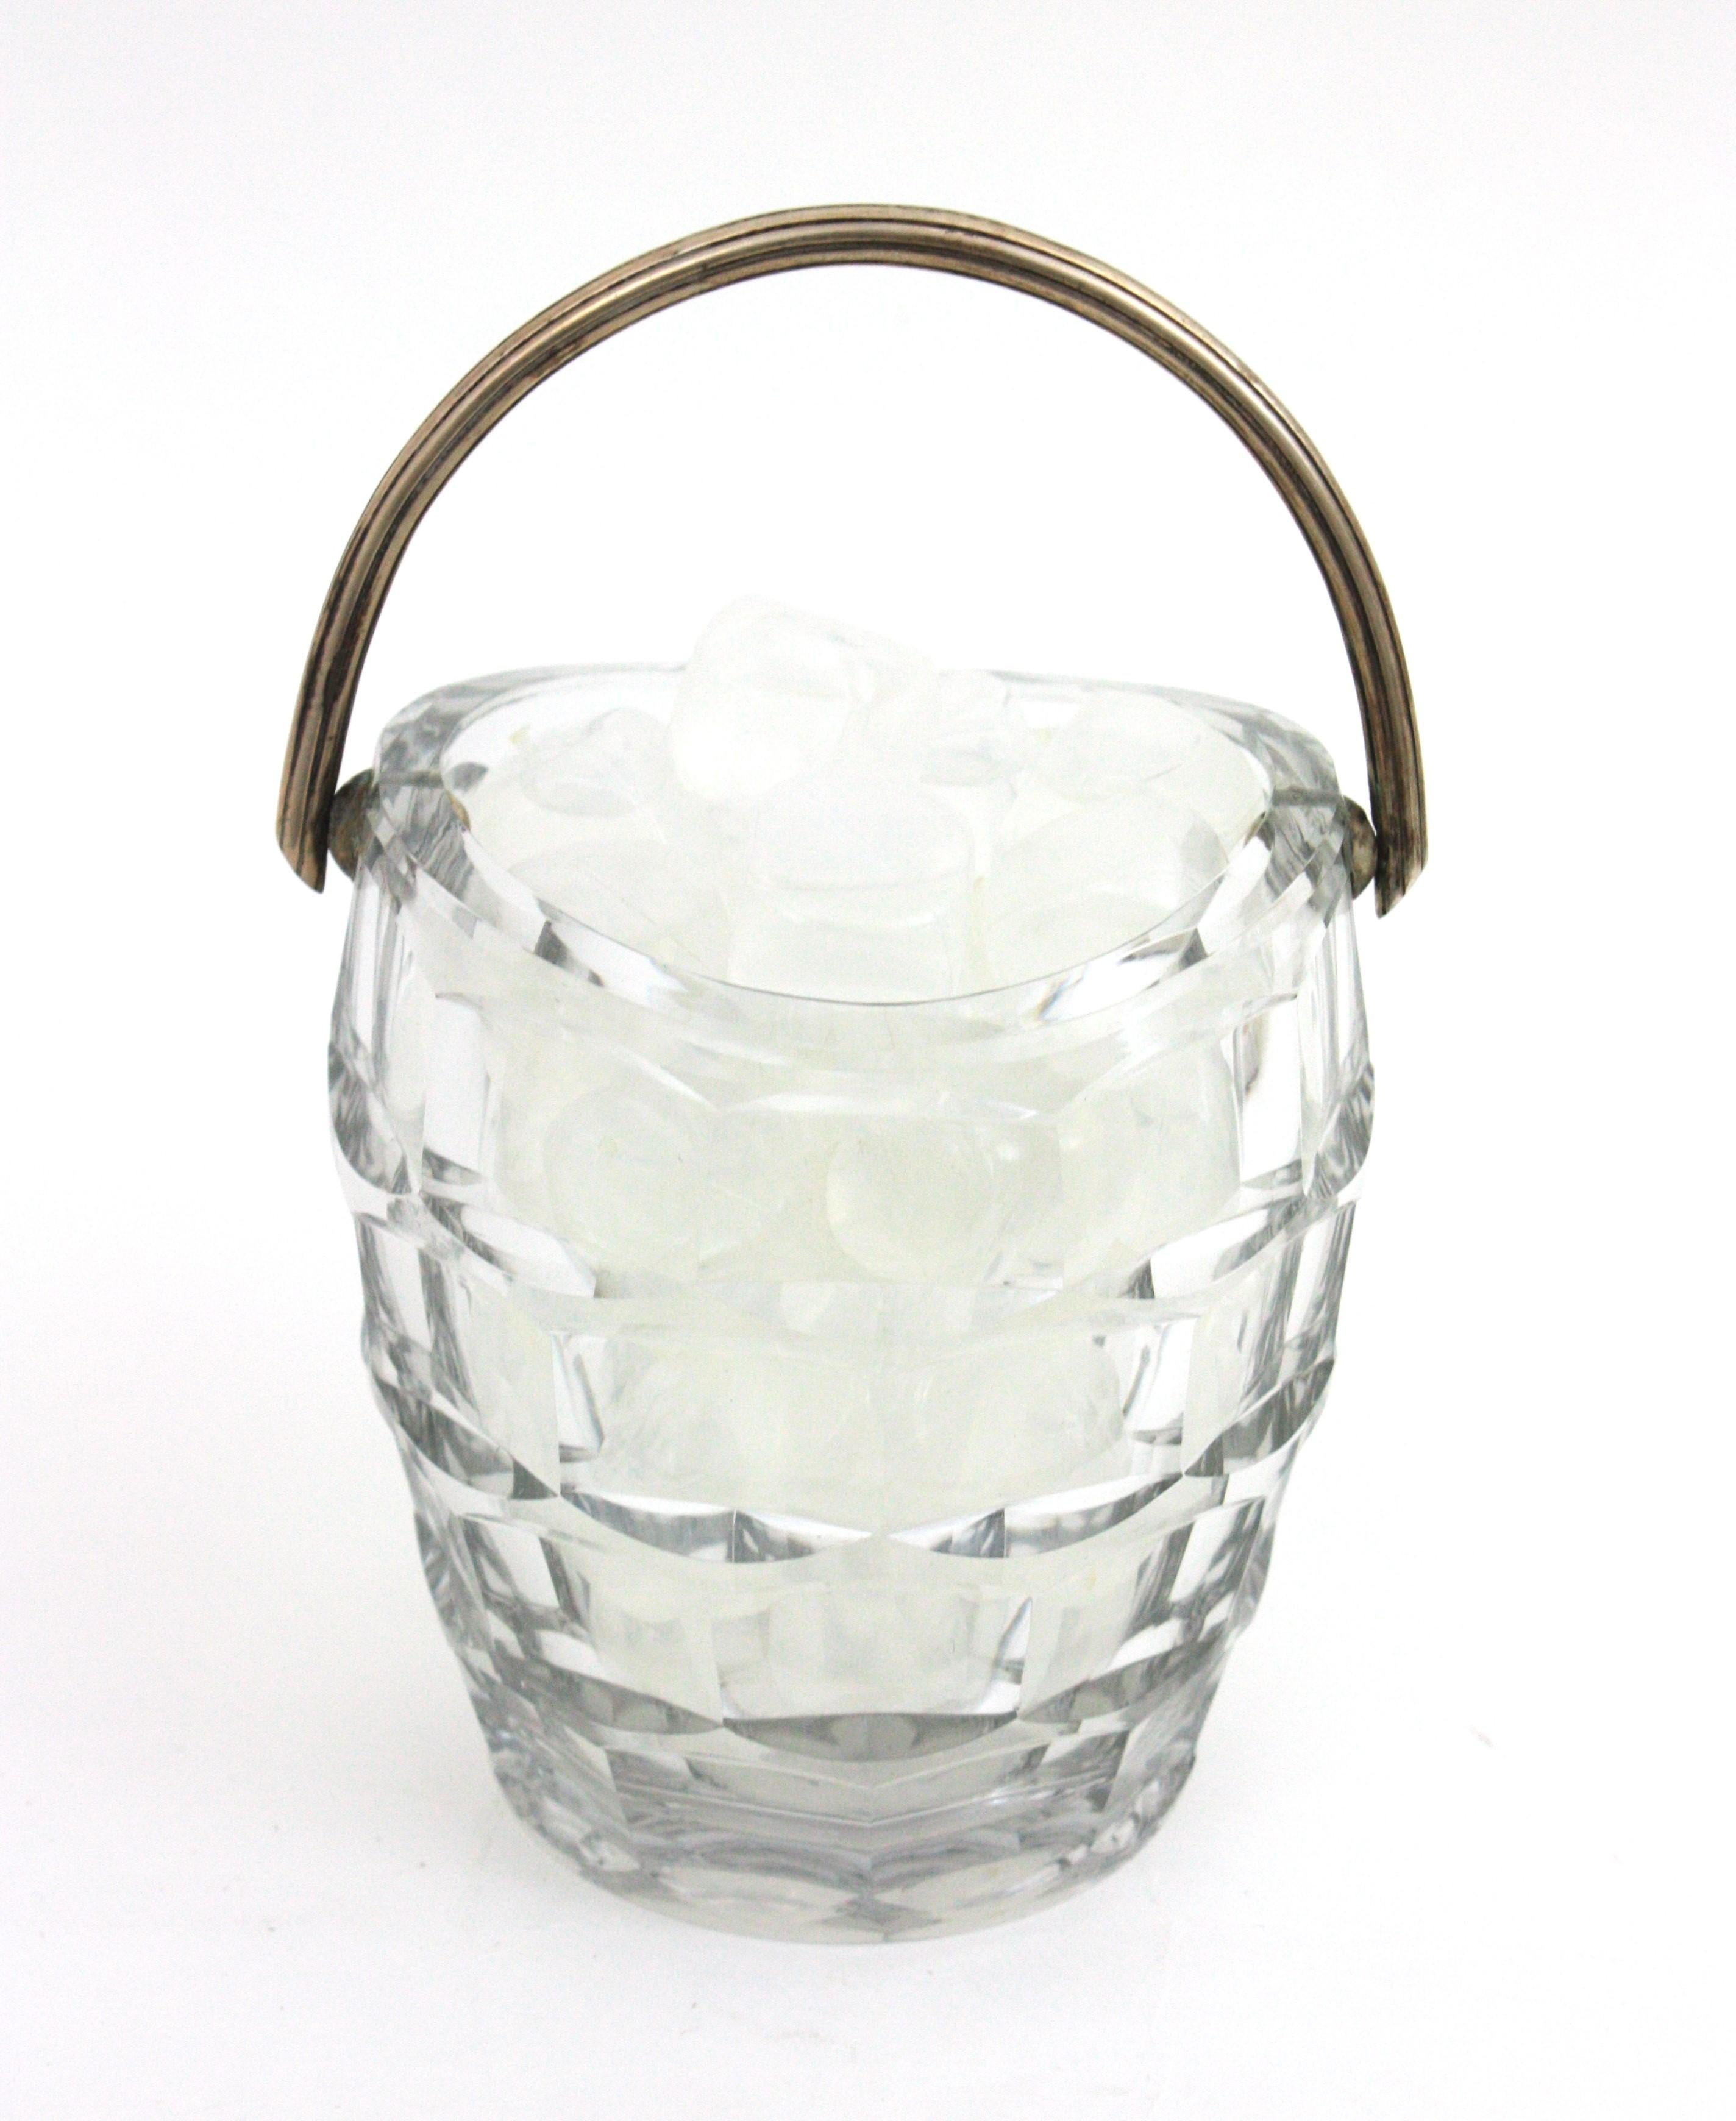 Faceted Midcentury Baccarat Cut Crystal and Silver Ice Bucket, 1950s For Sale